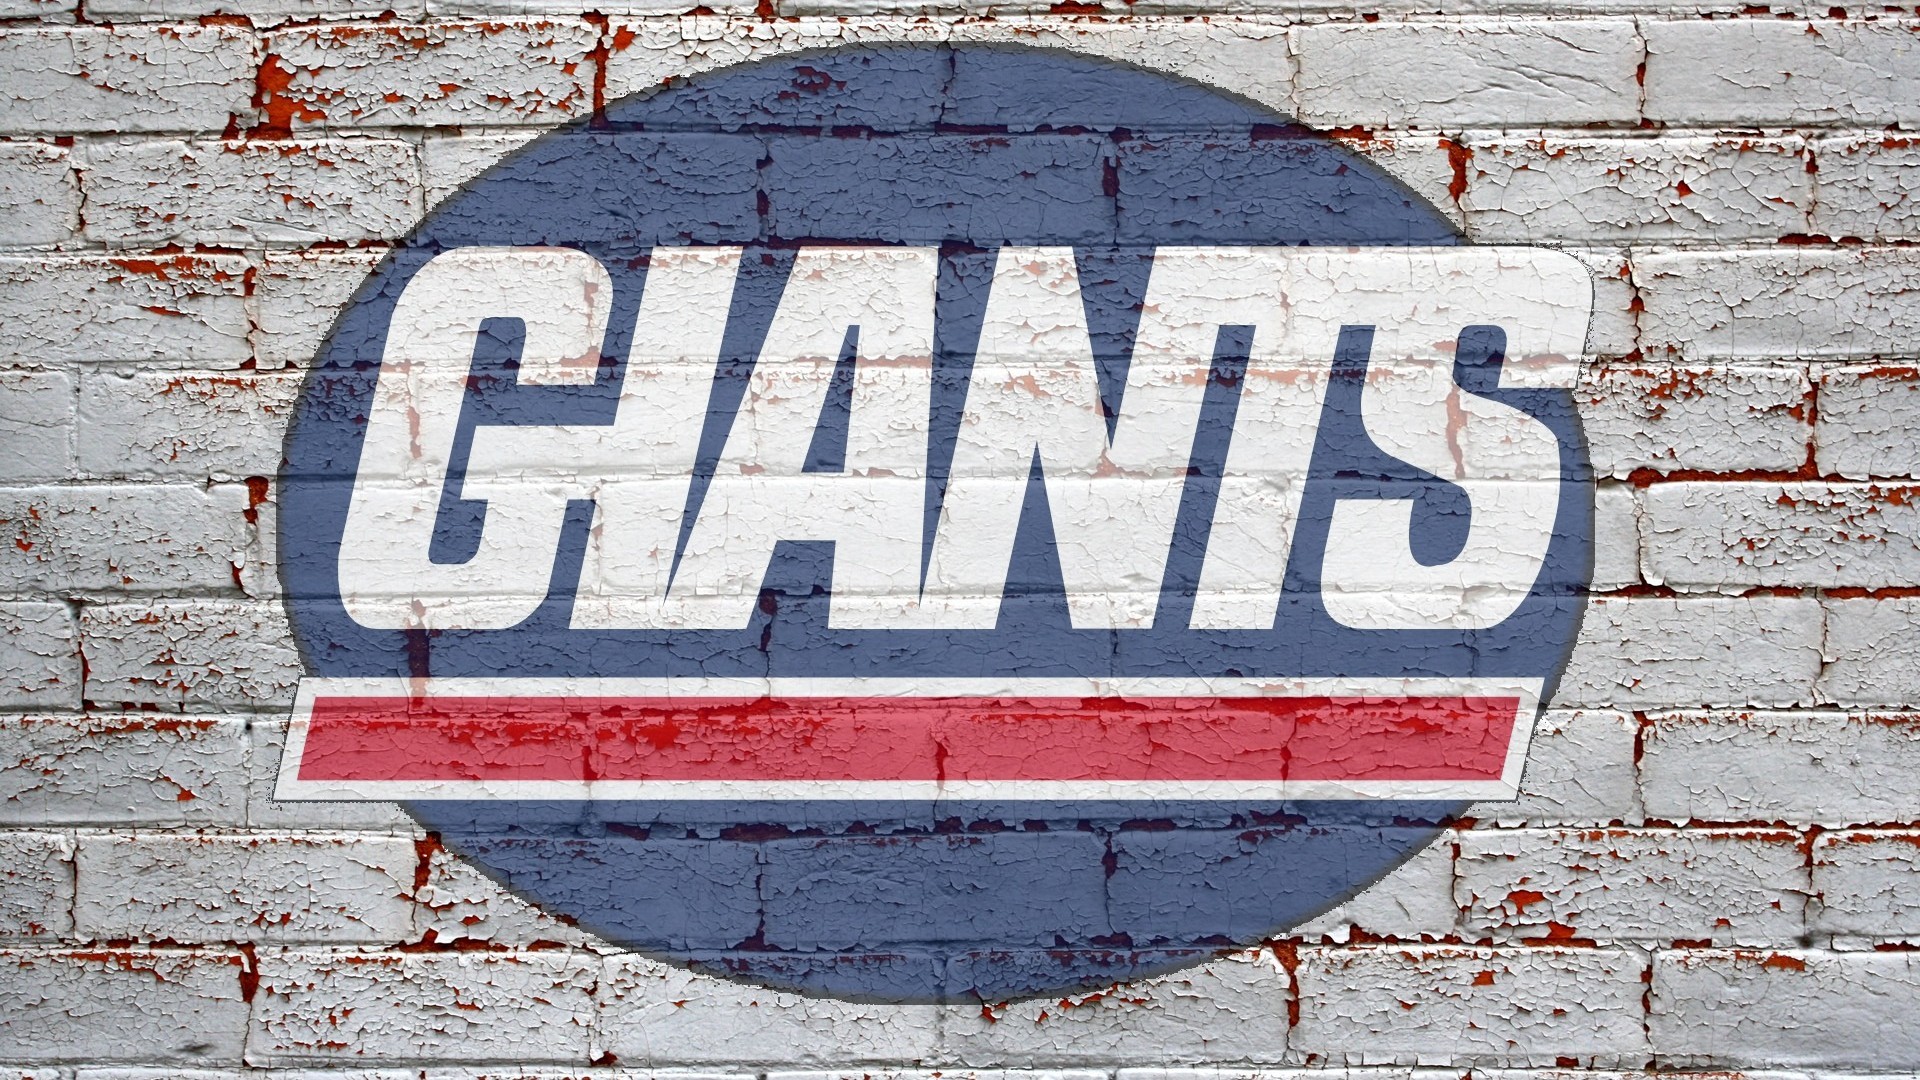 New York Giants NFL HD Wallpapers With high-resolution 1920X1080 pixel. You can use this wallpaper for your Mac or Windows Desktop Background, iPhone, Android or Tablet and another Smartphone device